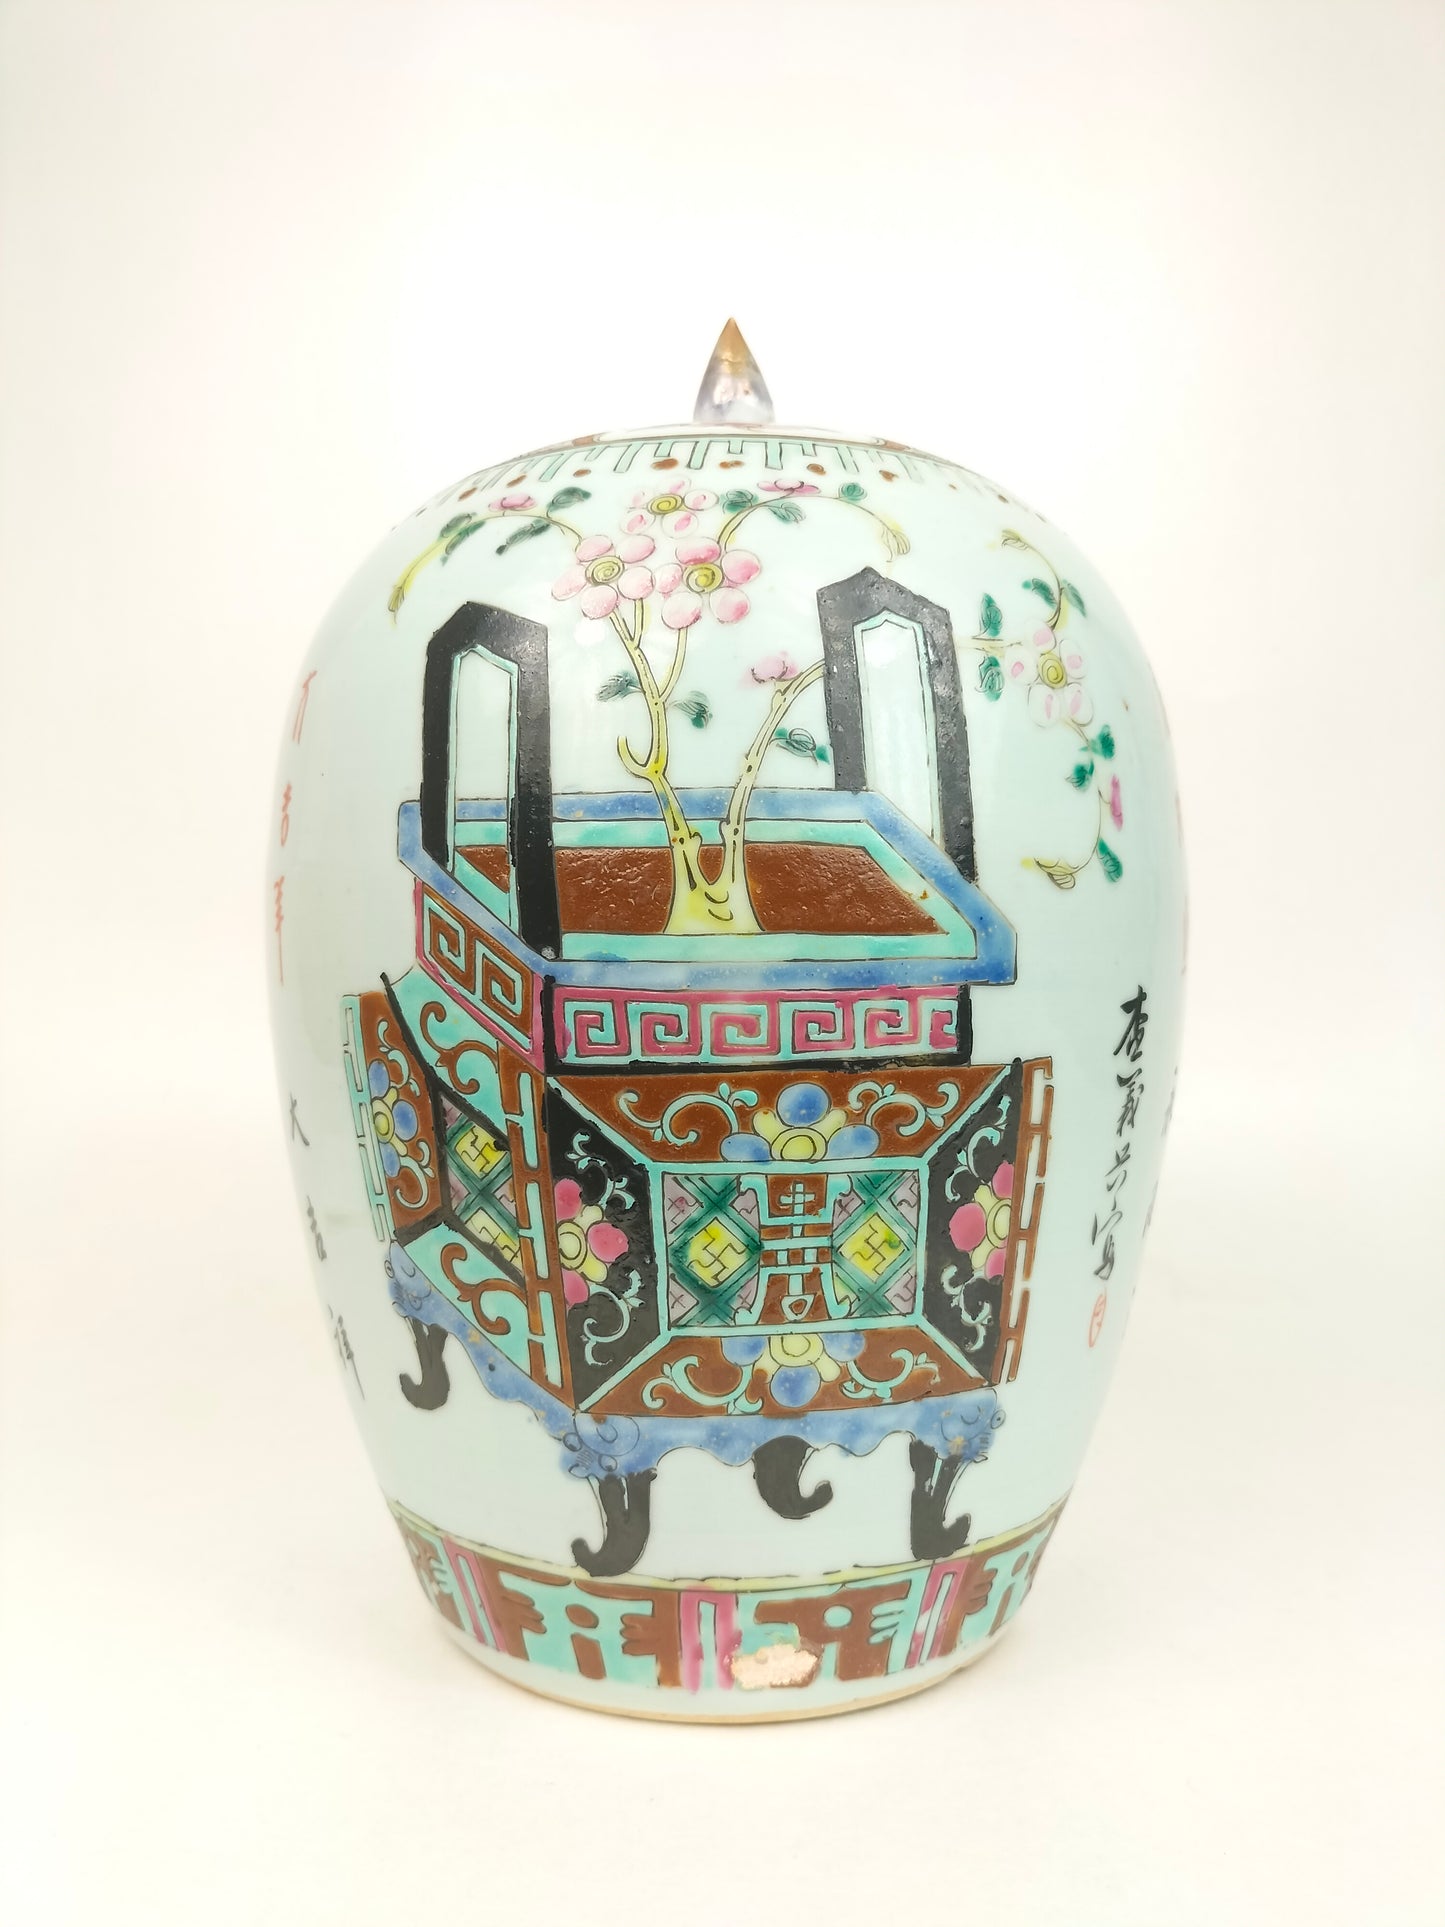 Antique Chinese famille verte ginger jar decorated with flower baskets // Qing Dynasty - 19th century